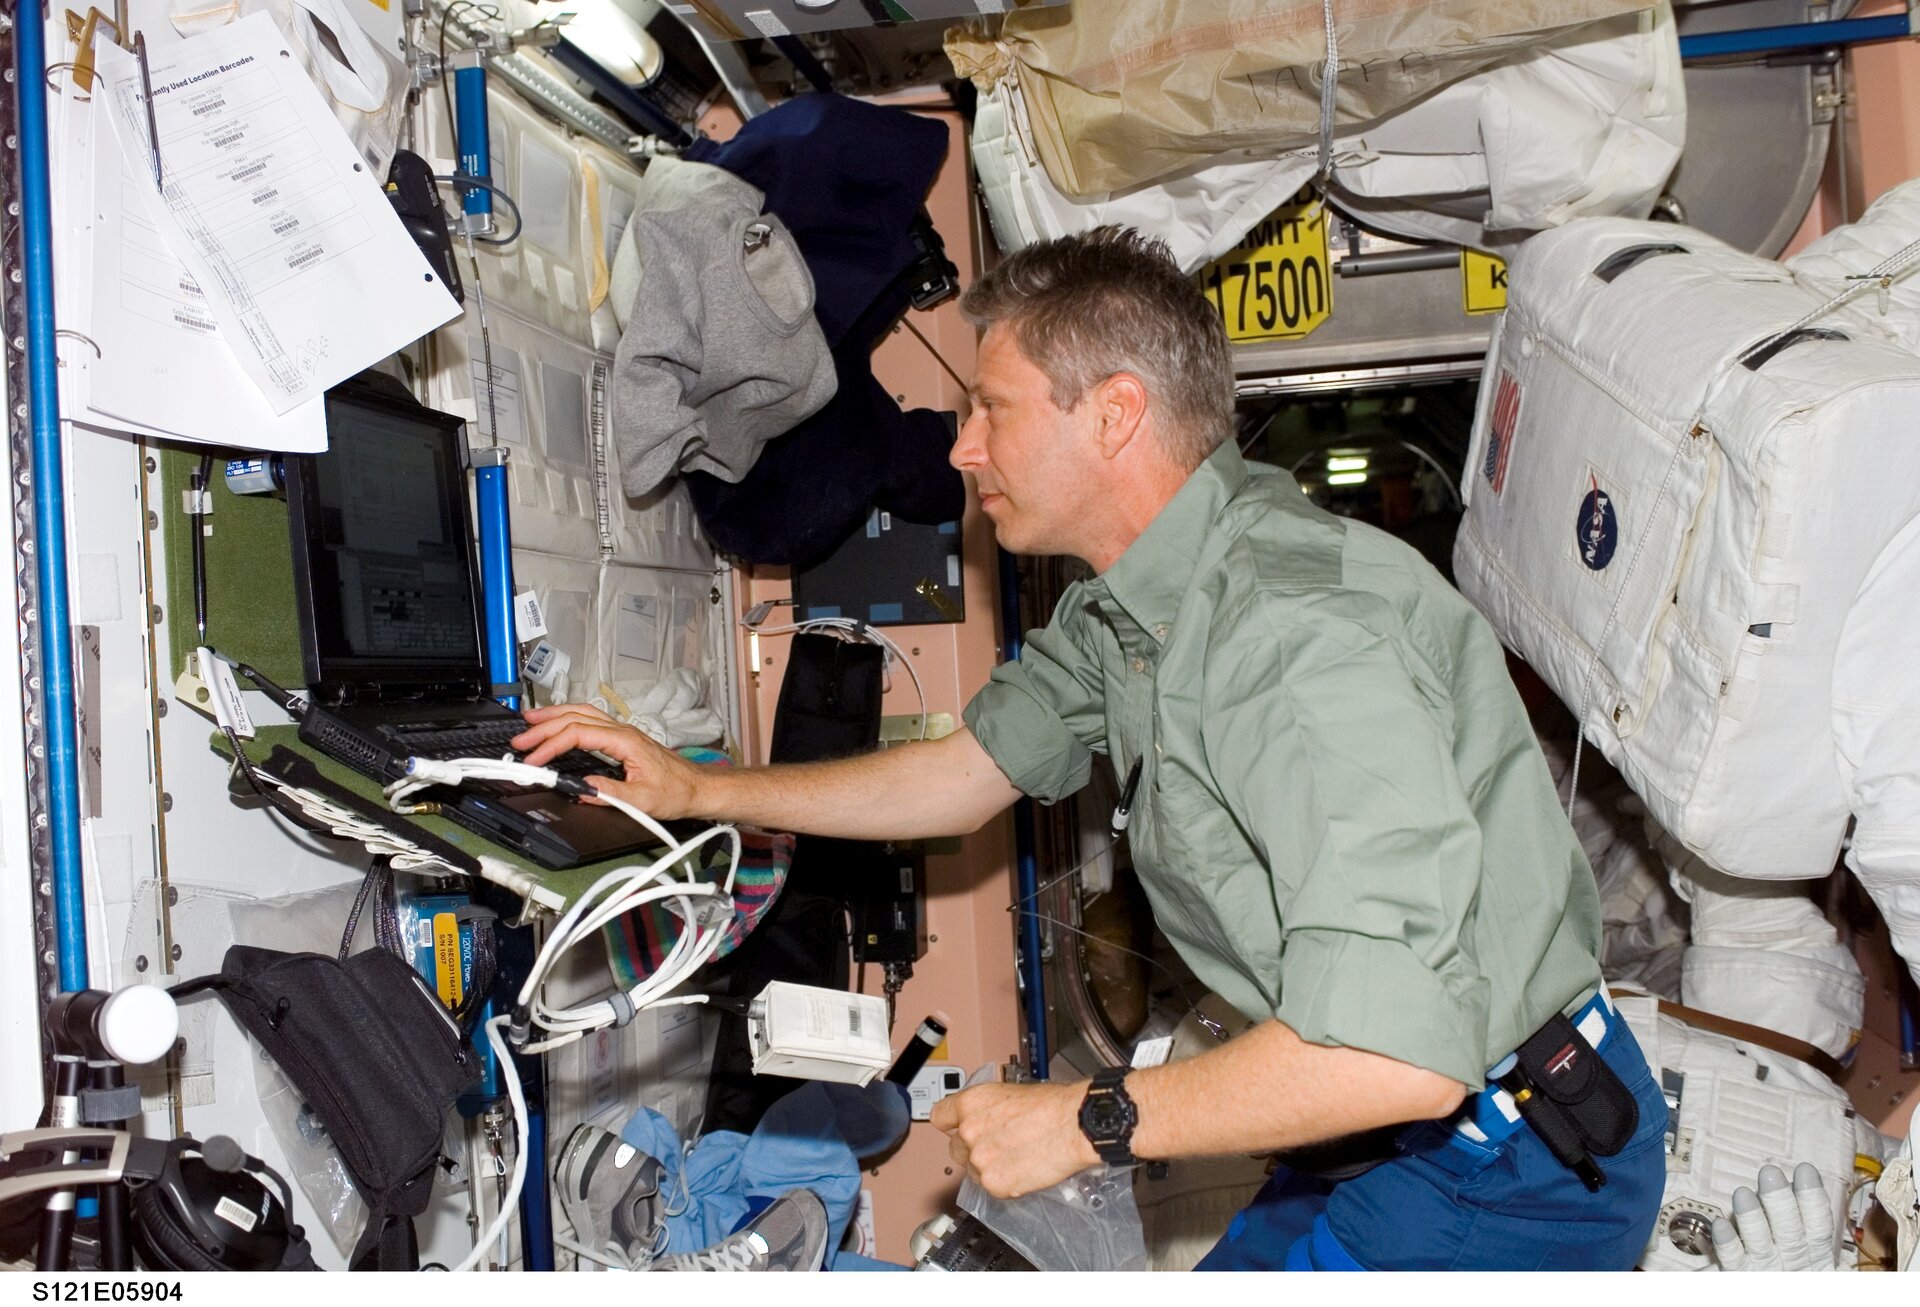 Thomas Reiter uses a computer in the Unity node of the International Space Station